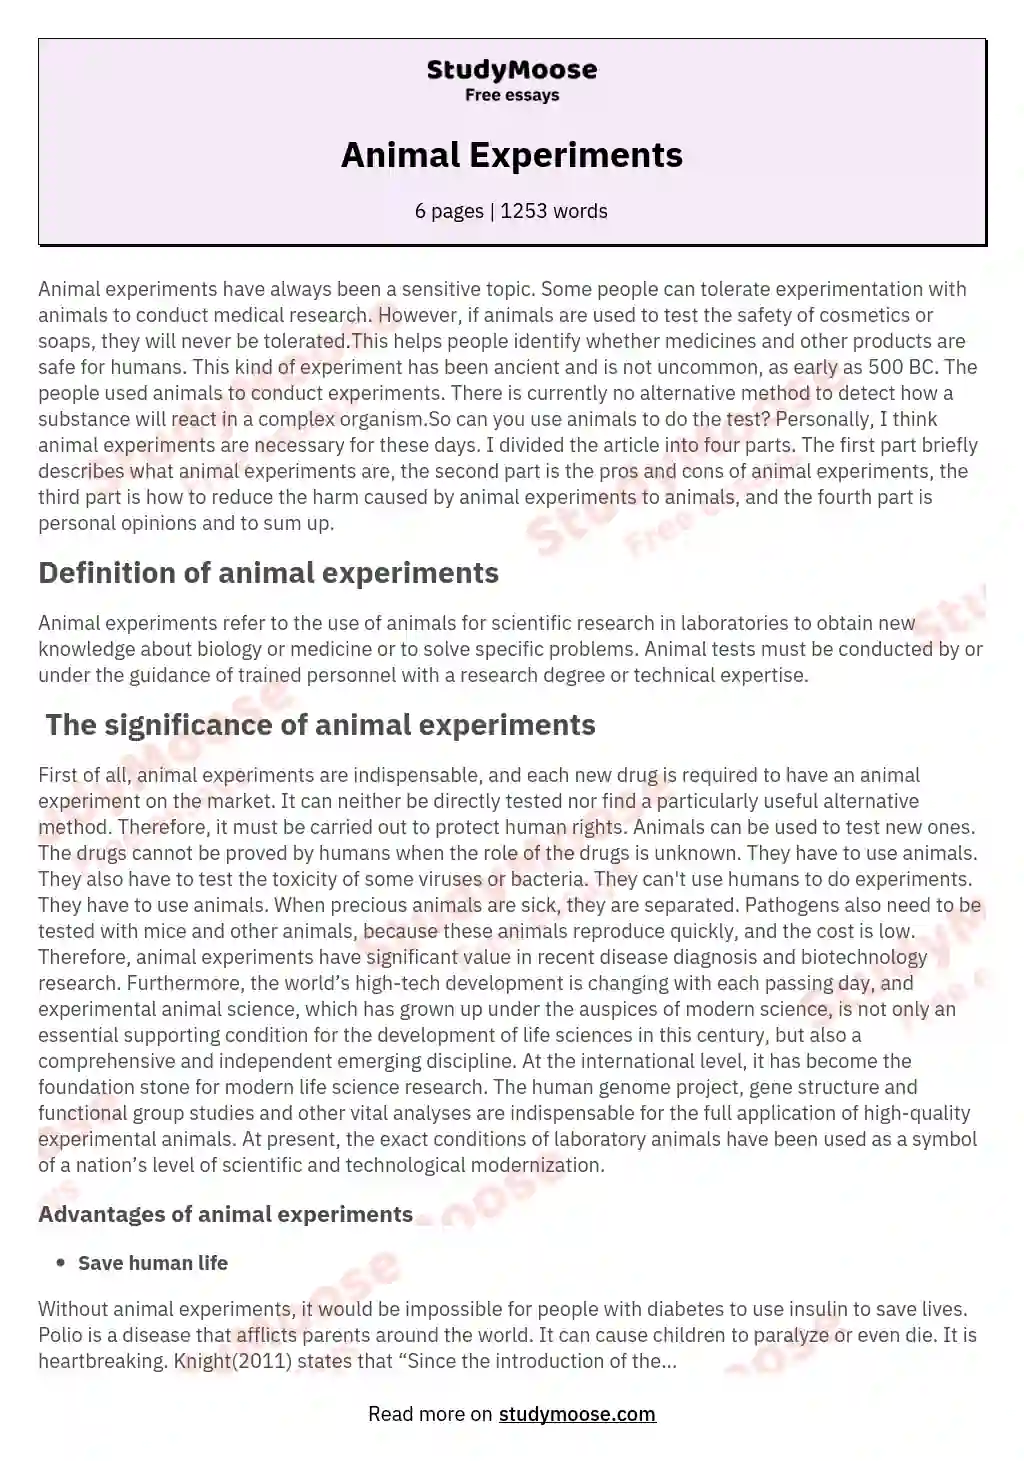 essay about animal experimentation